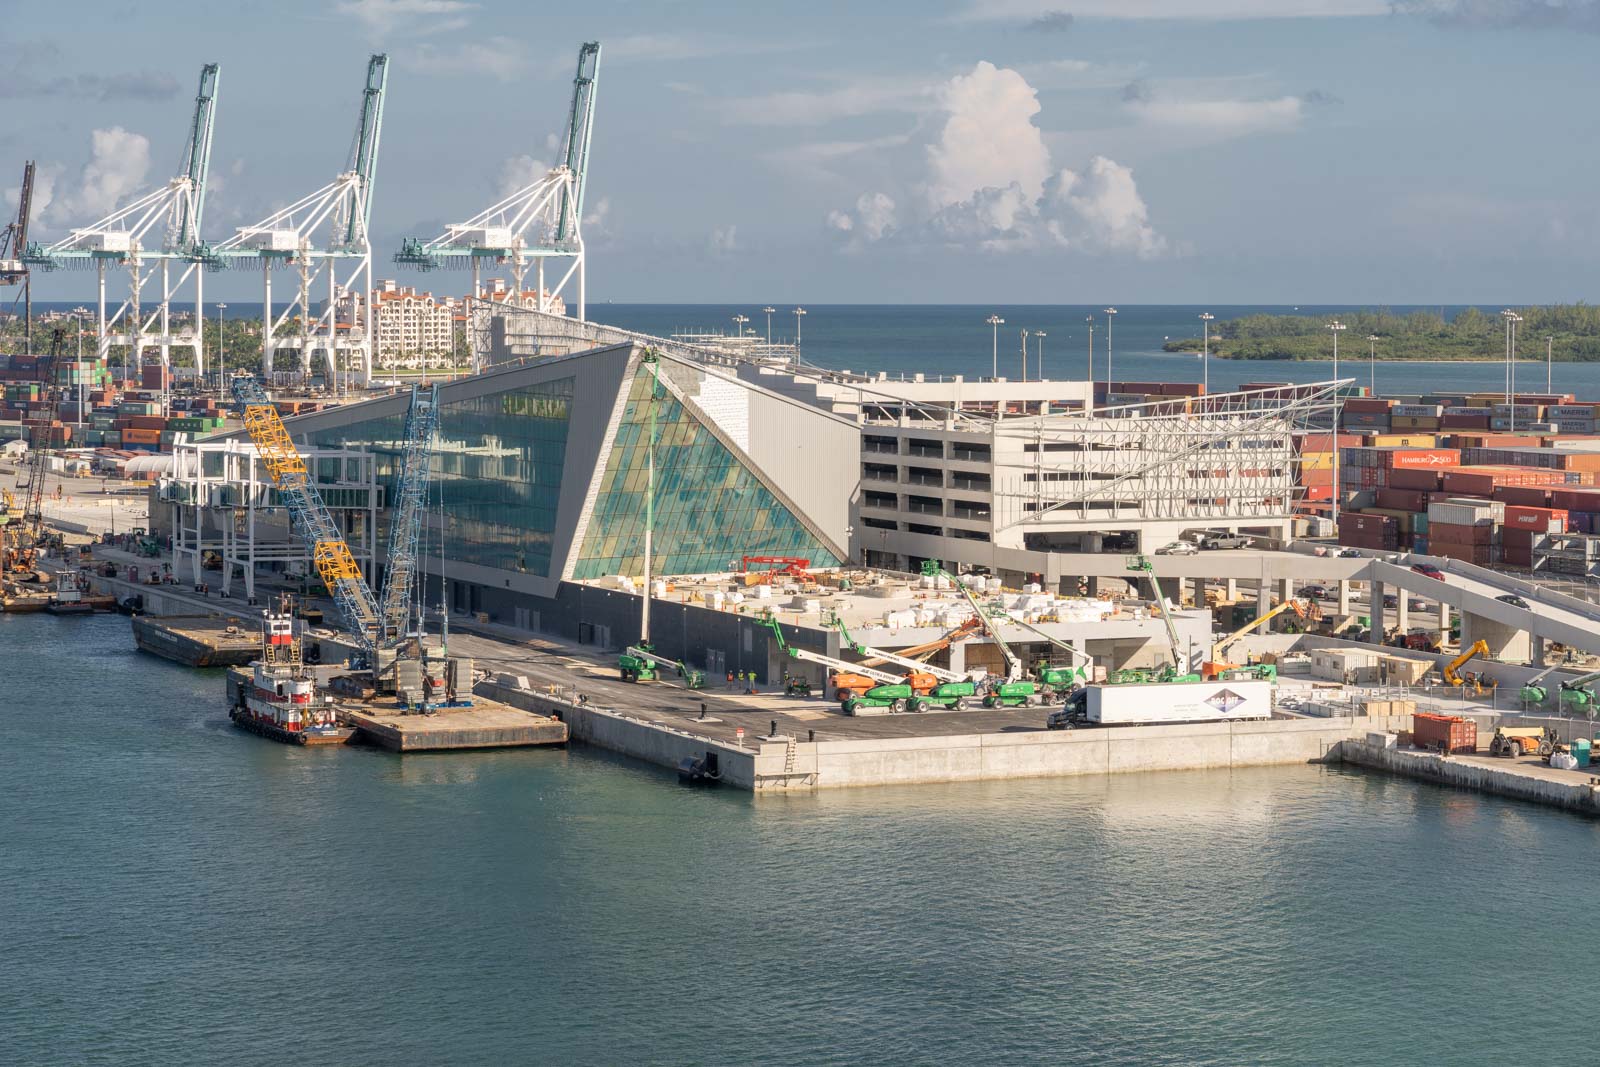 Gangways added to new Royal Caribbean cruise terminal in PortMiami